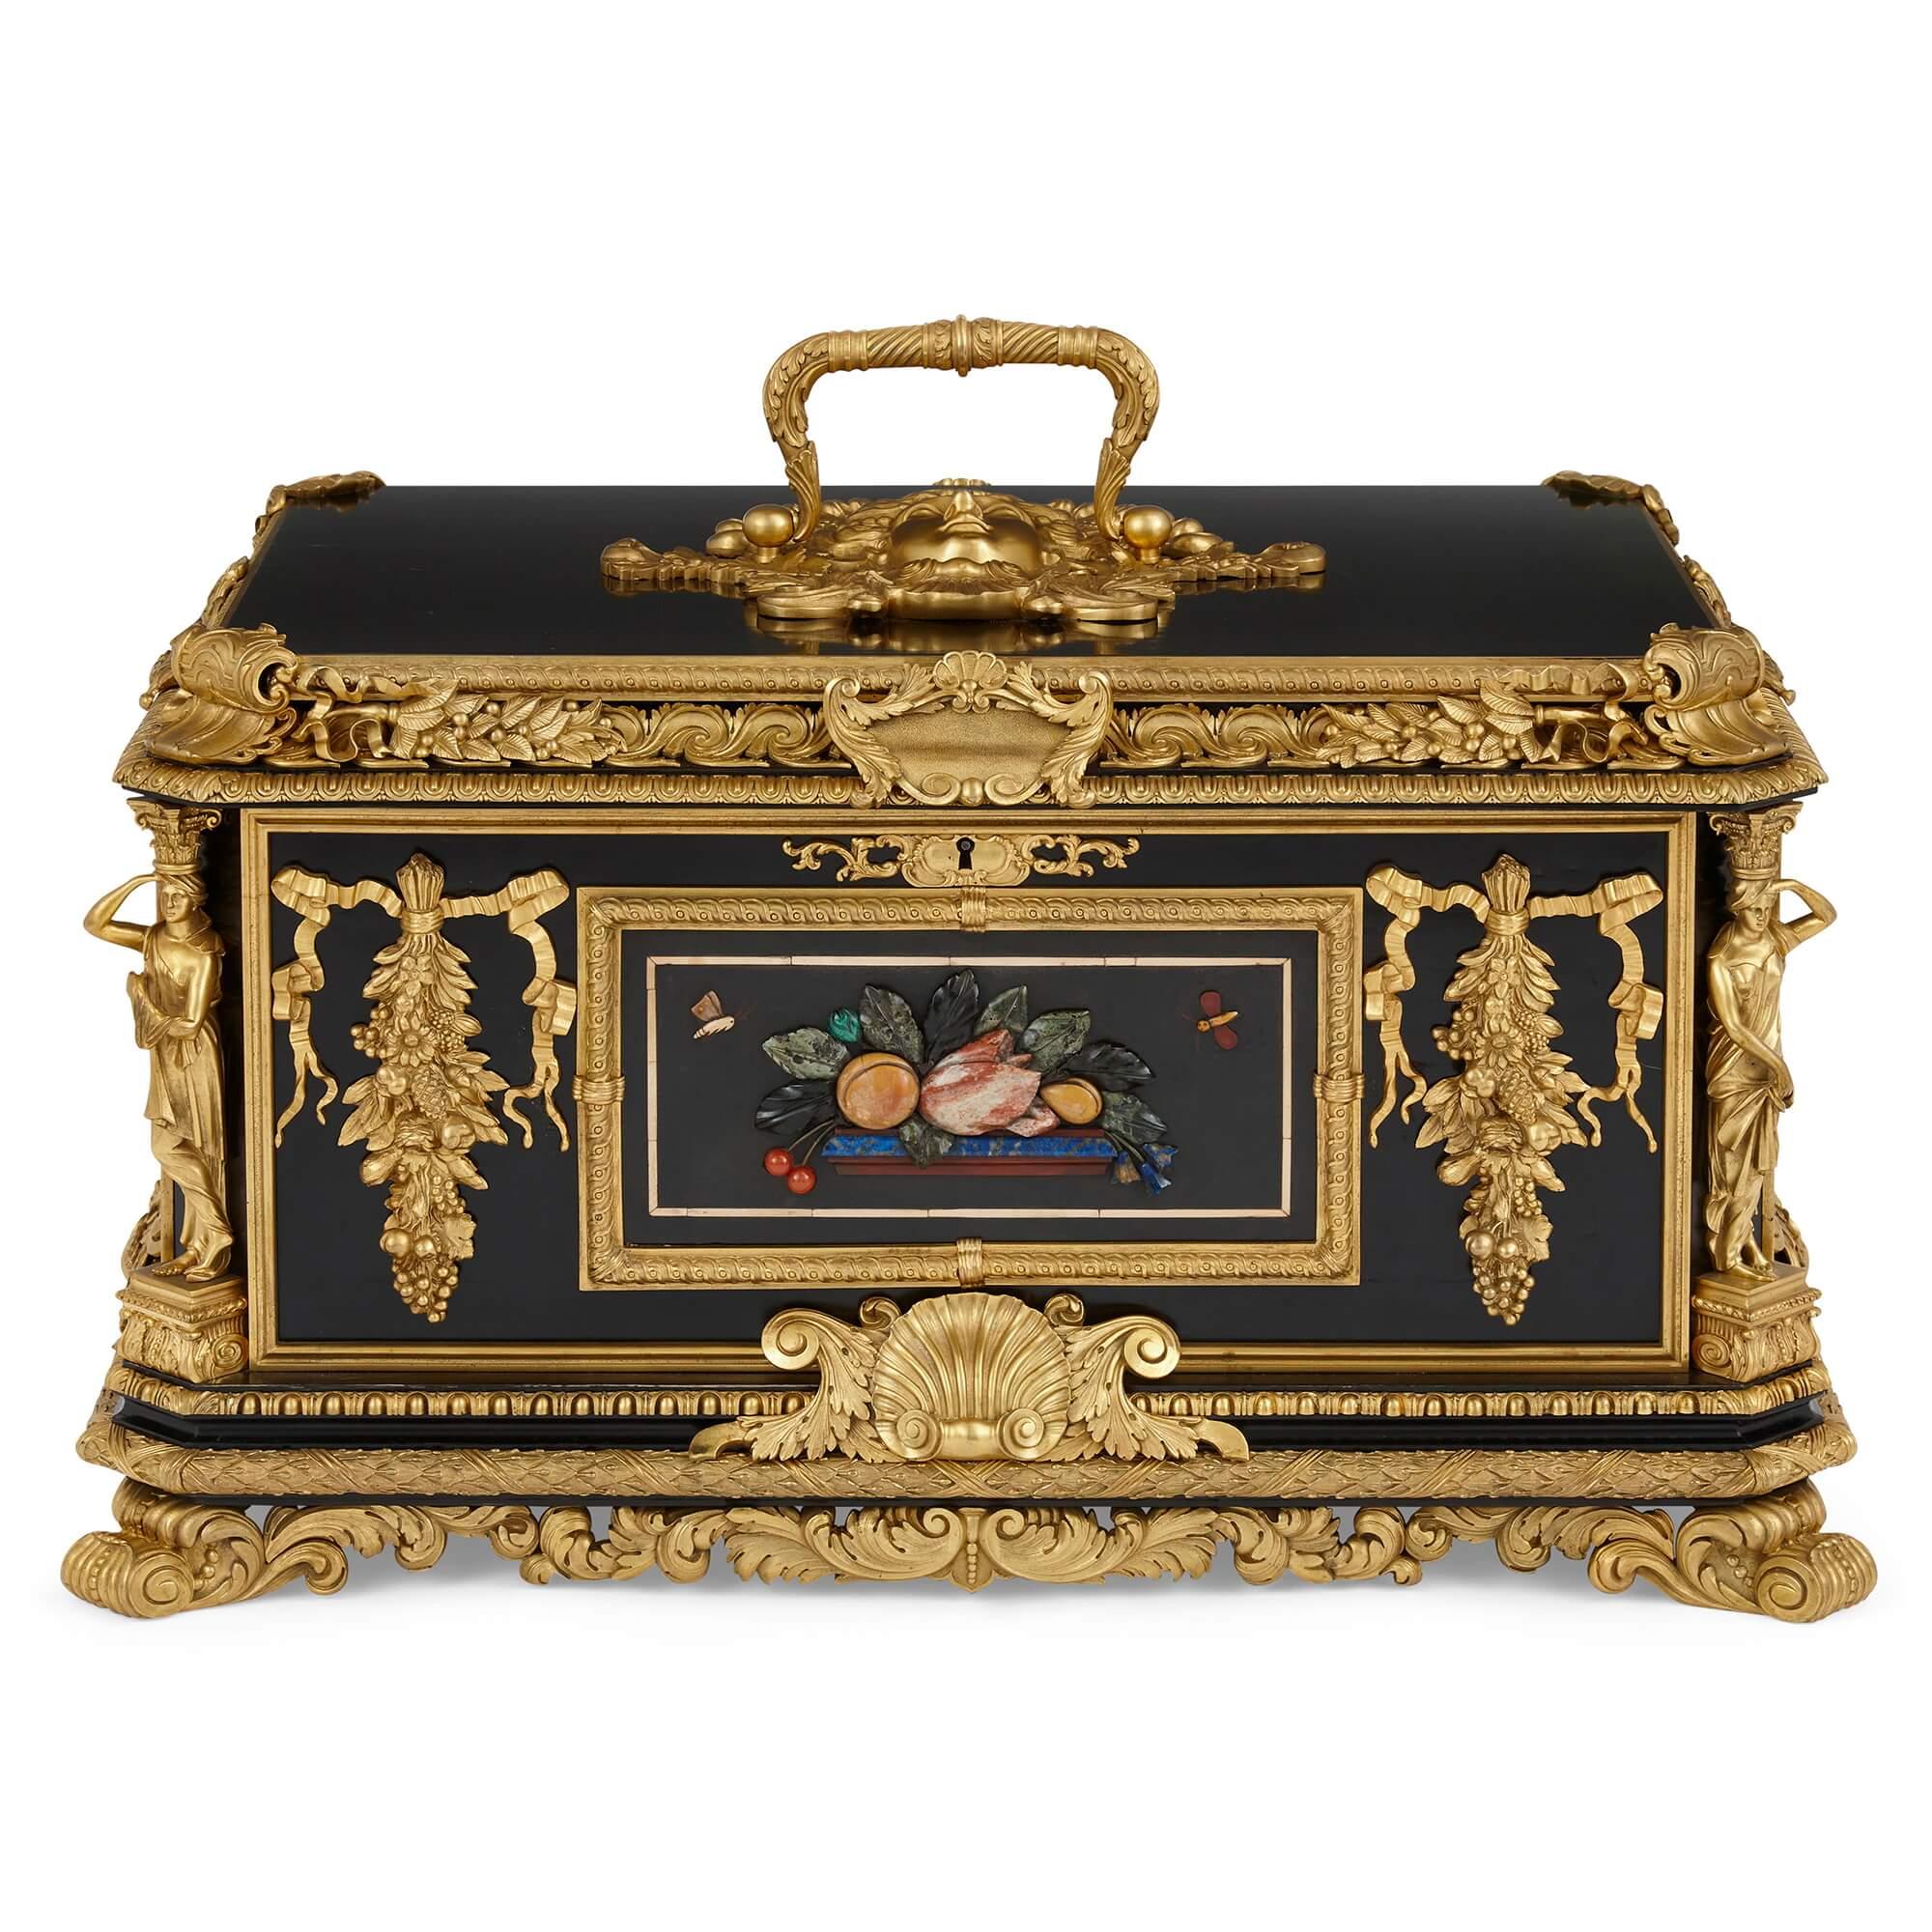 Magnificent and large ormolu and hardstone mounted ebonized wooden casket 
English, 19th Century
Height 41cm, width 72cm, depth 52cm

Exceptionally fine and richly adorned, this beautiful piece is a large, ebonized wooden casket or coffer, mounted